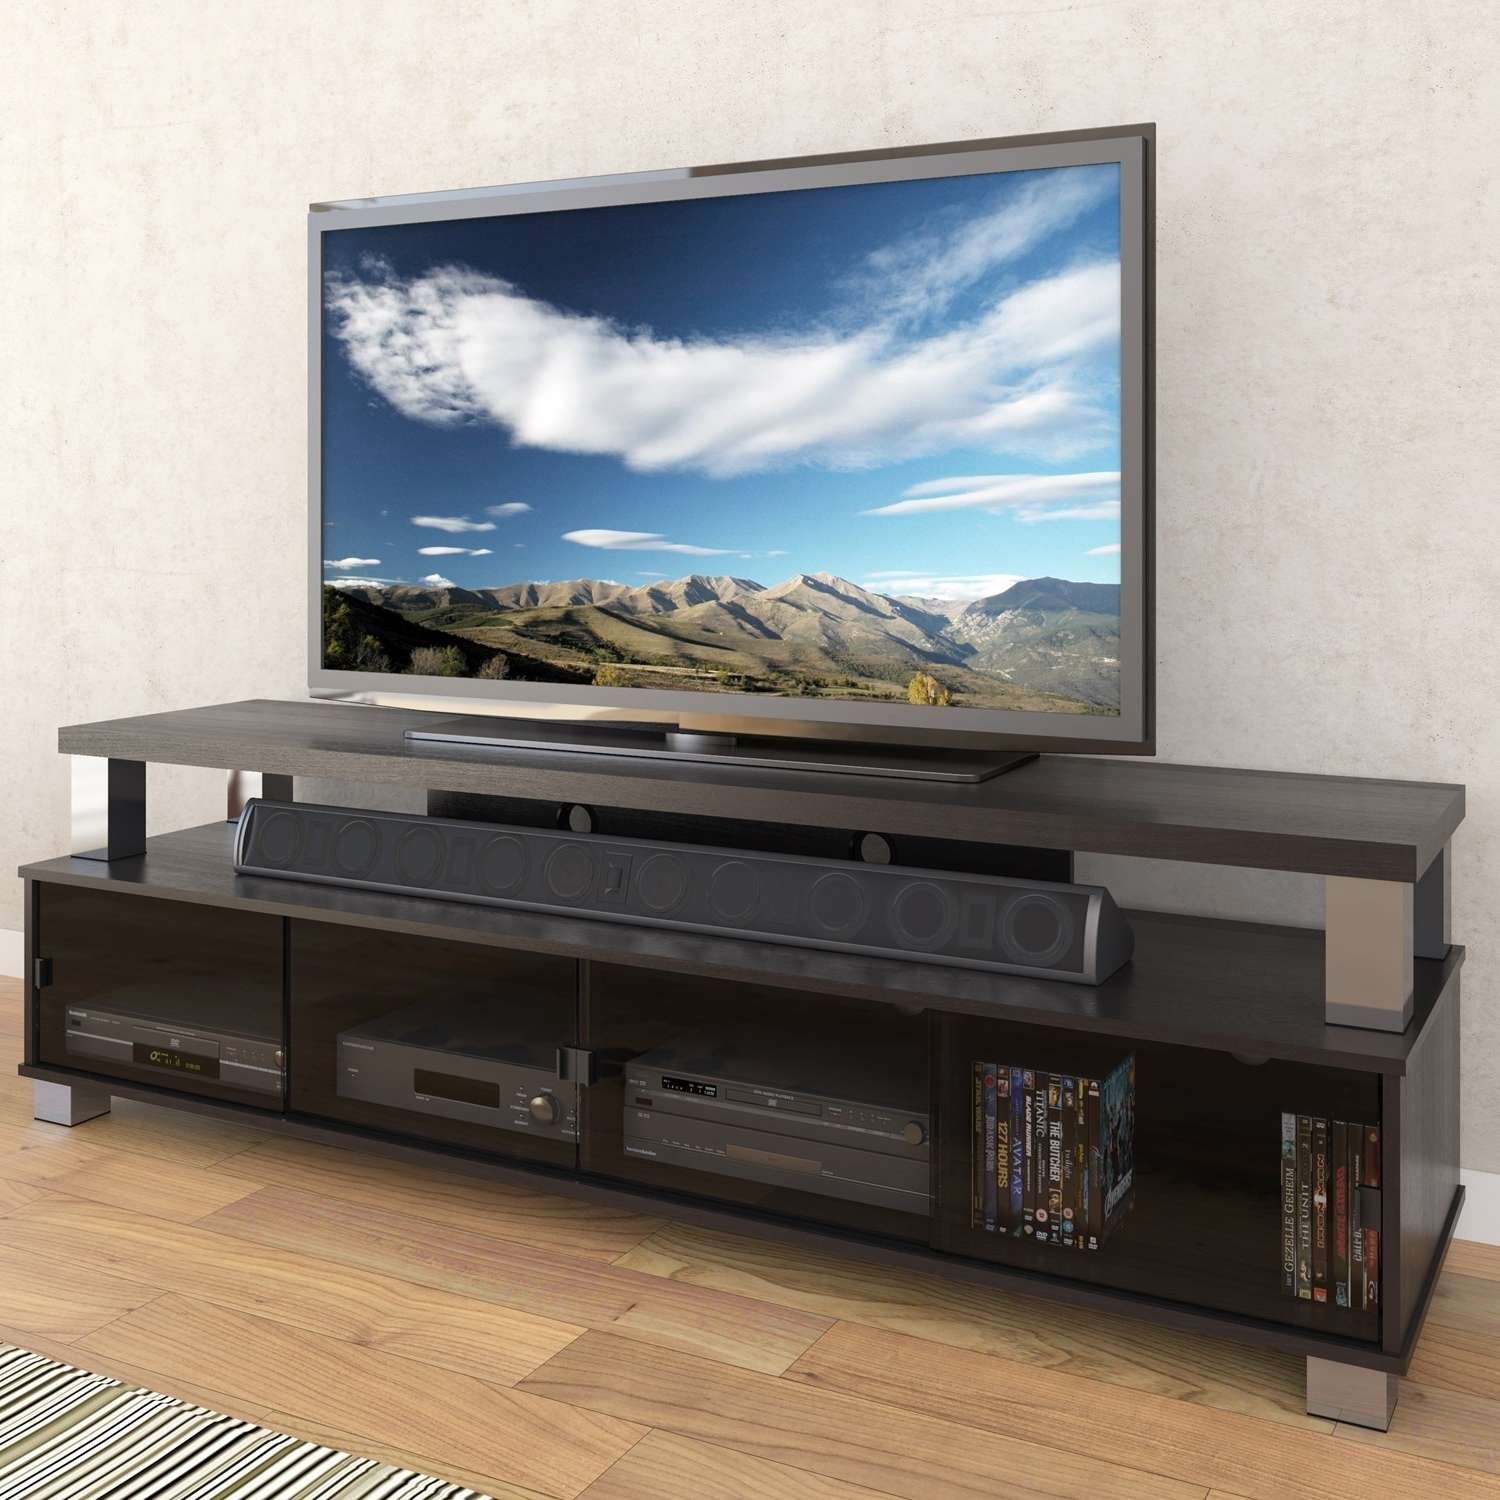 Sonax Bromley 75" Ravenwood Black 2 Tier Tv Stand – B 003 Rbt Inside Sonax Tv Stands (View 1 of 15)